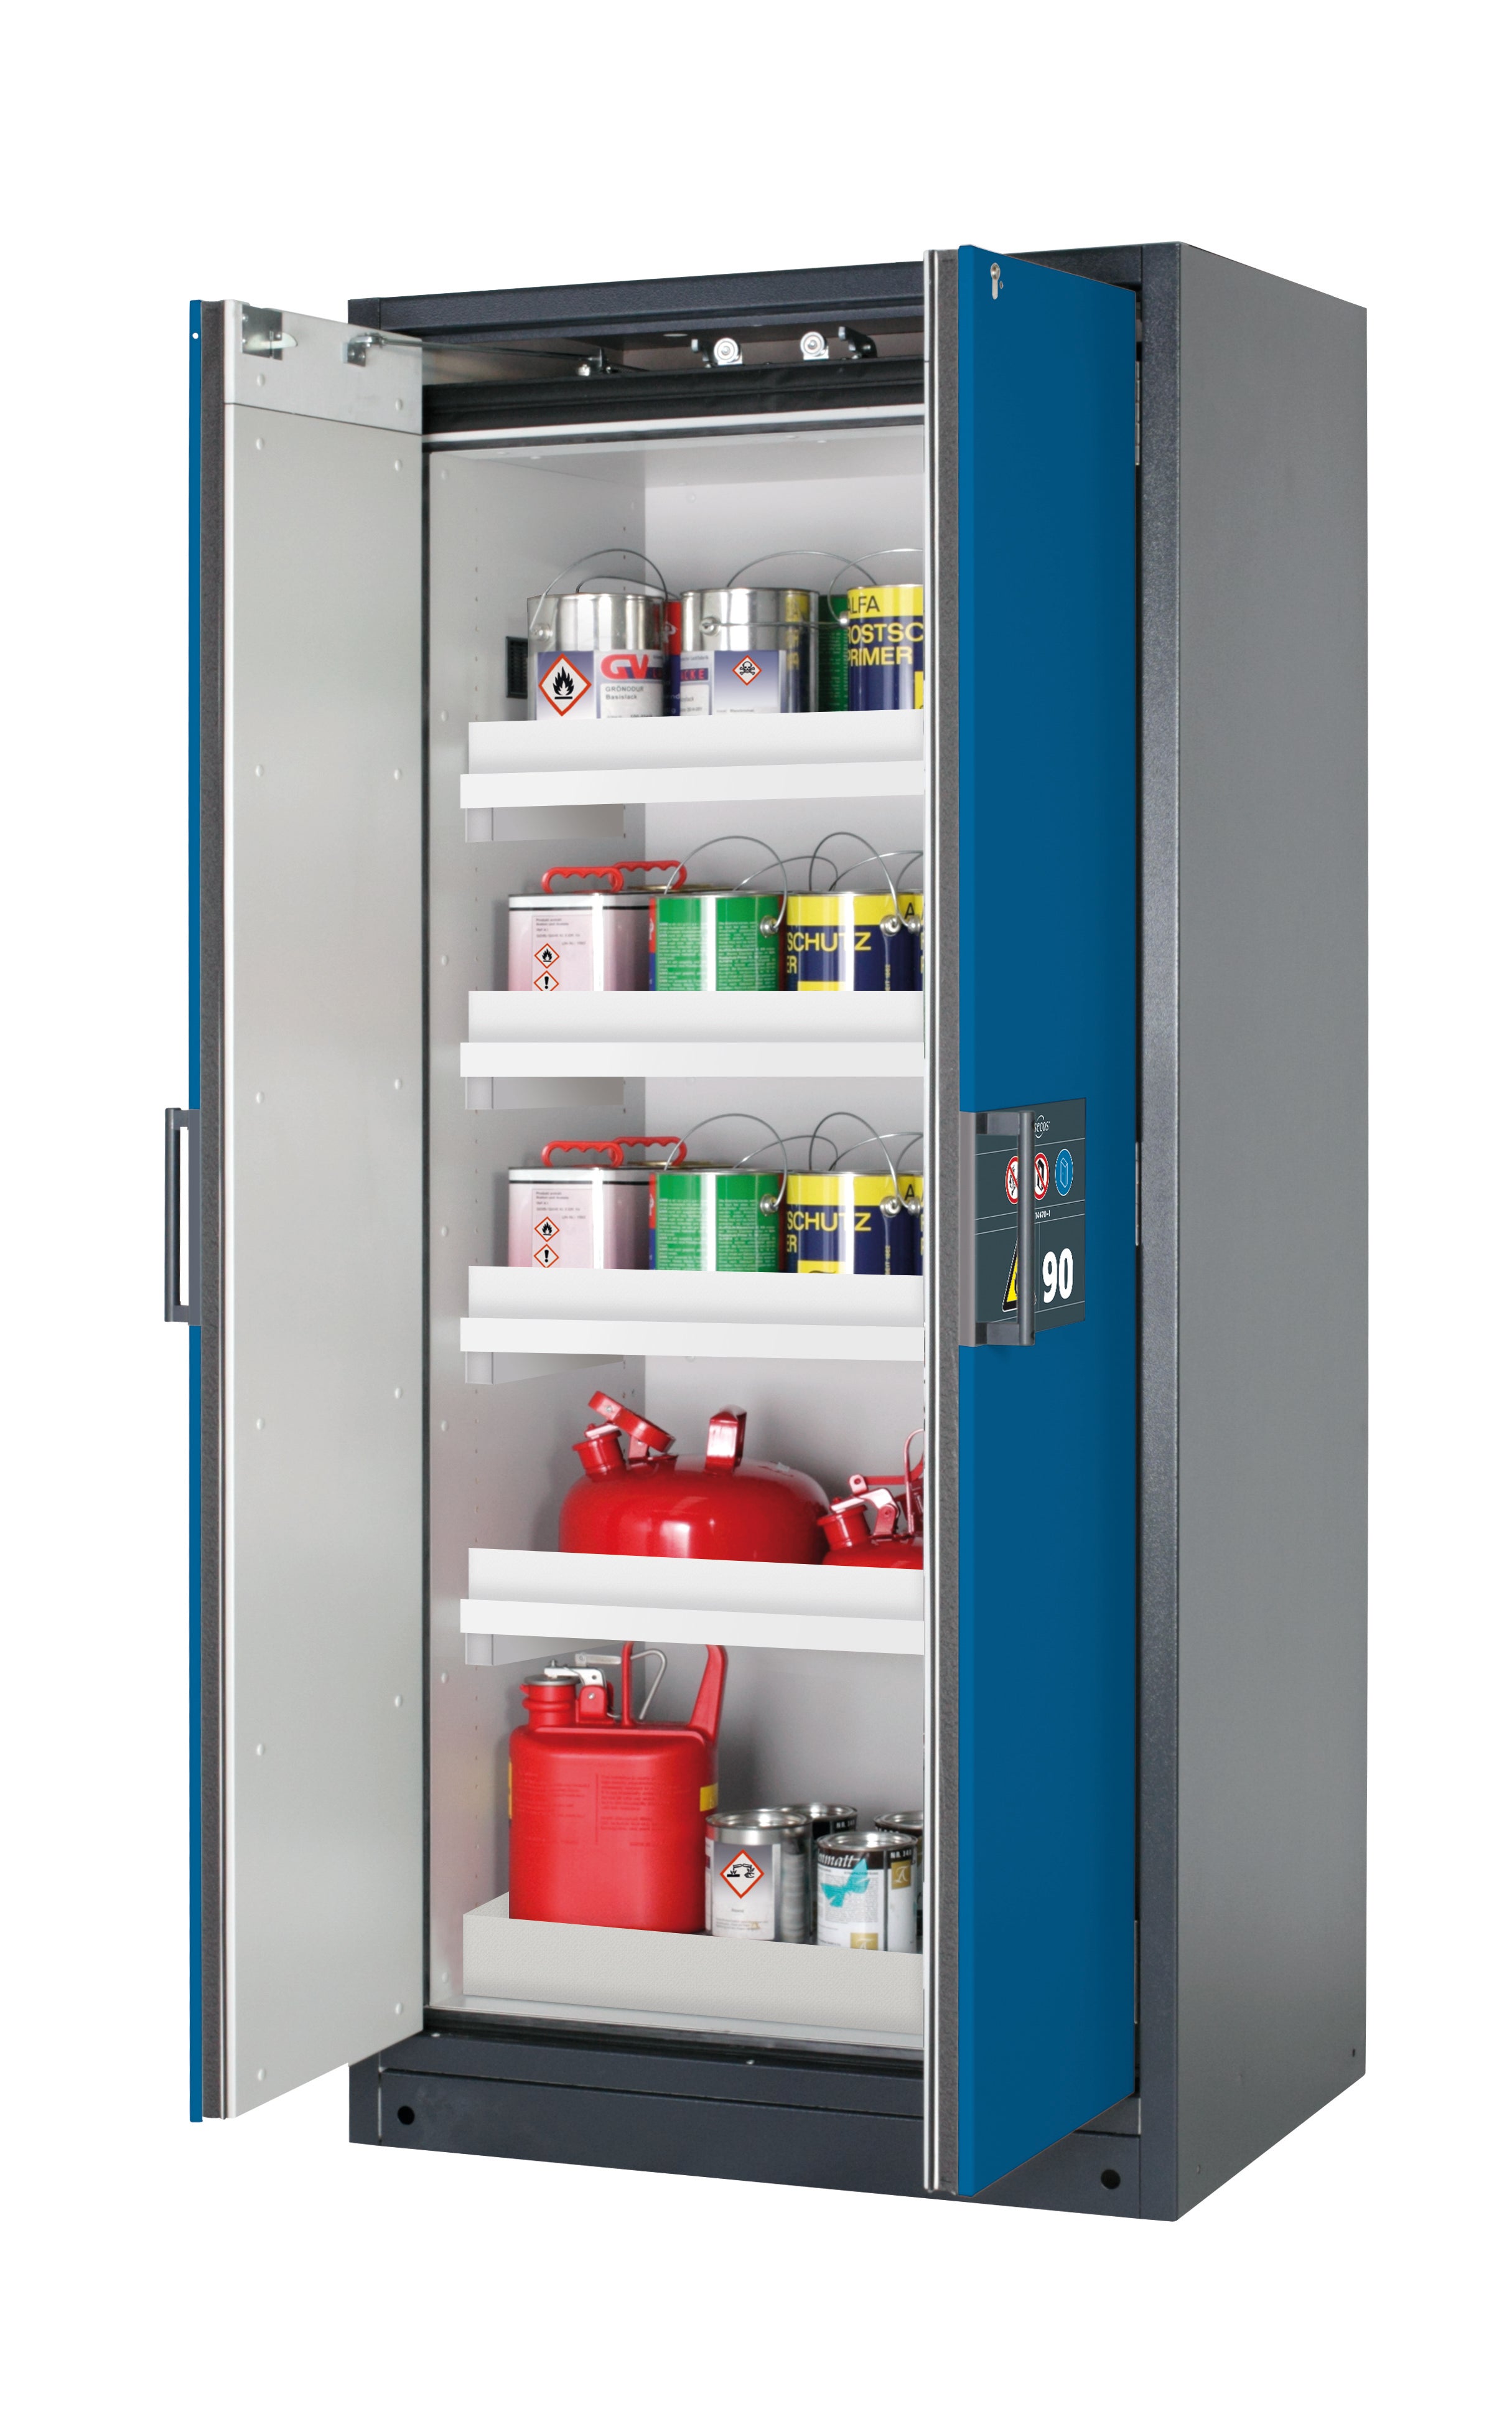 Type 90 safety storage cabinet Q-CLASSIC-90 model Q90.195.090 in gentian blue RAL 5010 with 4x tray shelf (standard) (polypropylene),